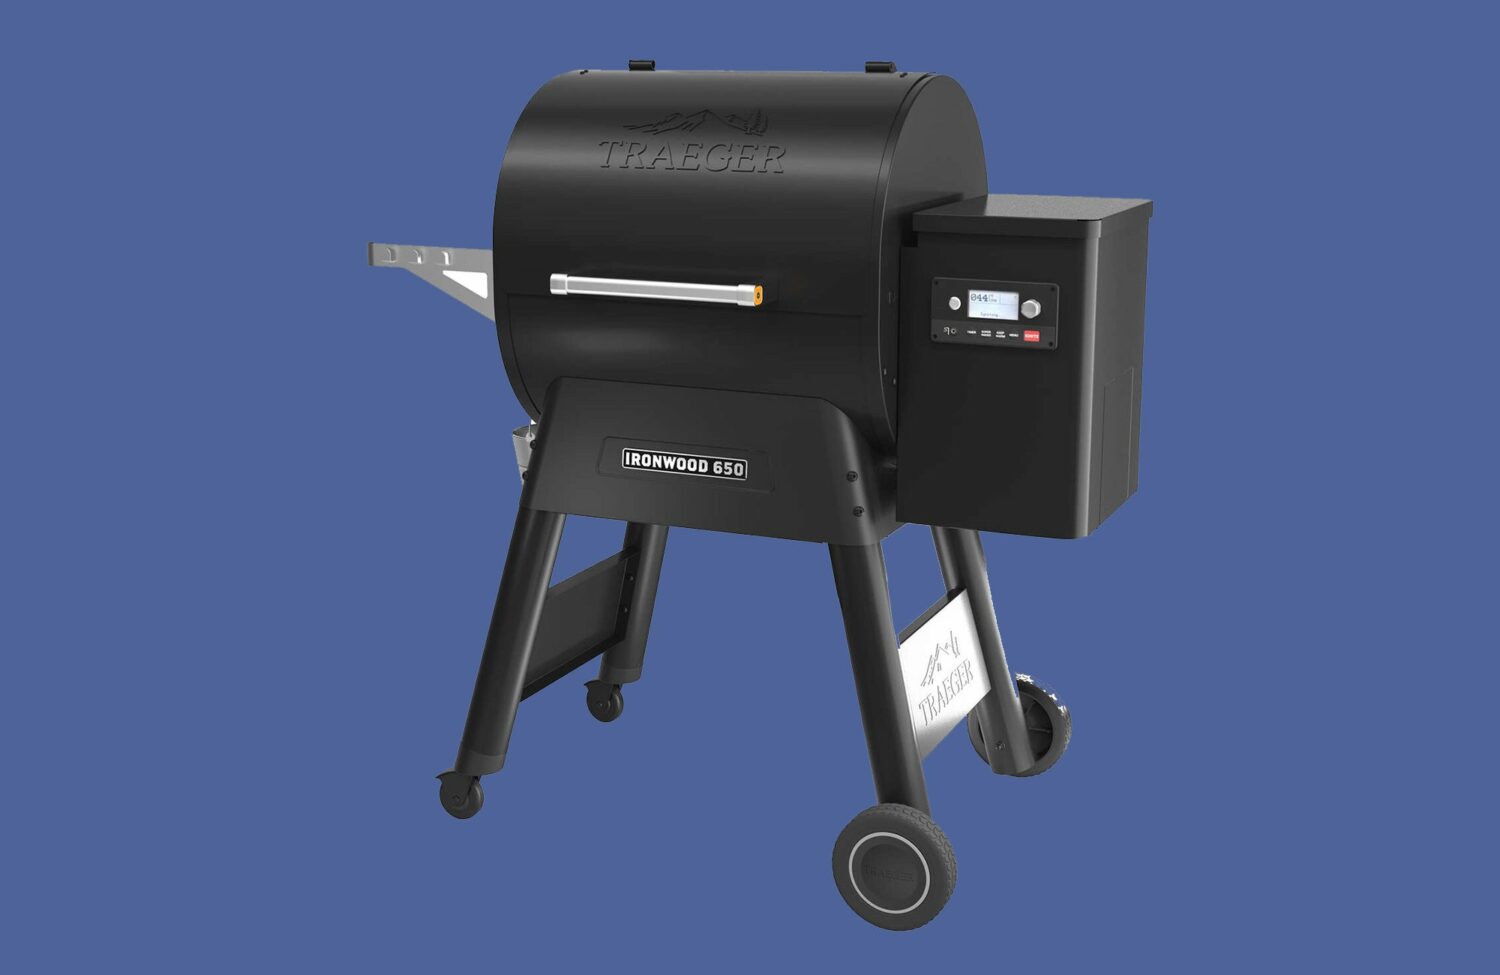 Buy a Traeger grill on Cyber Monday and get $165 worth of free accessories